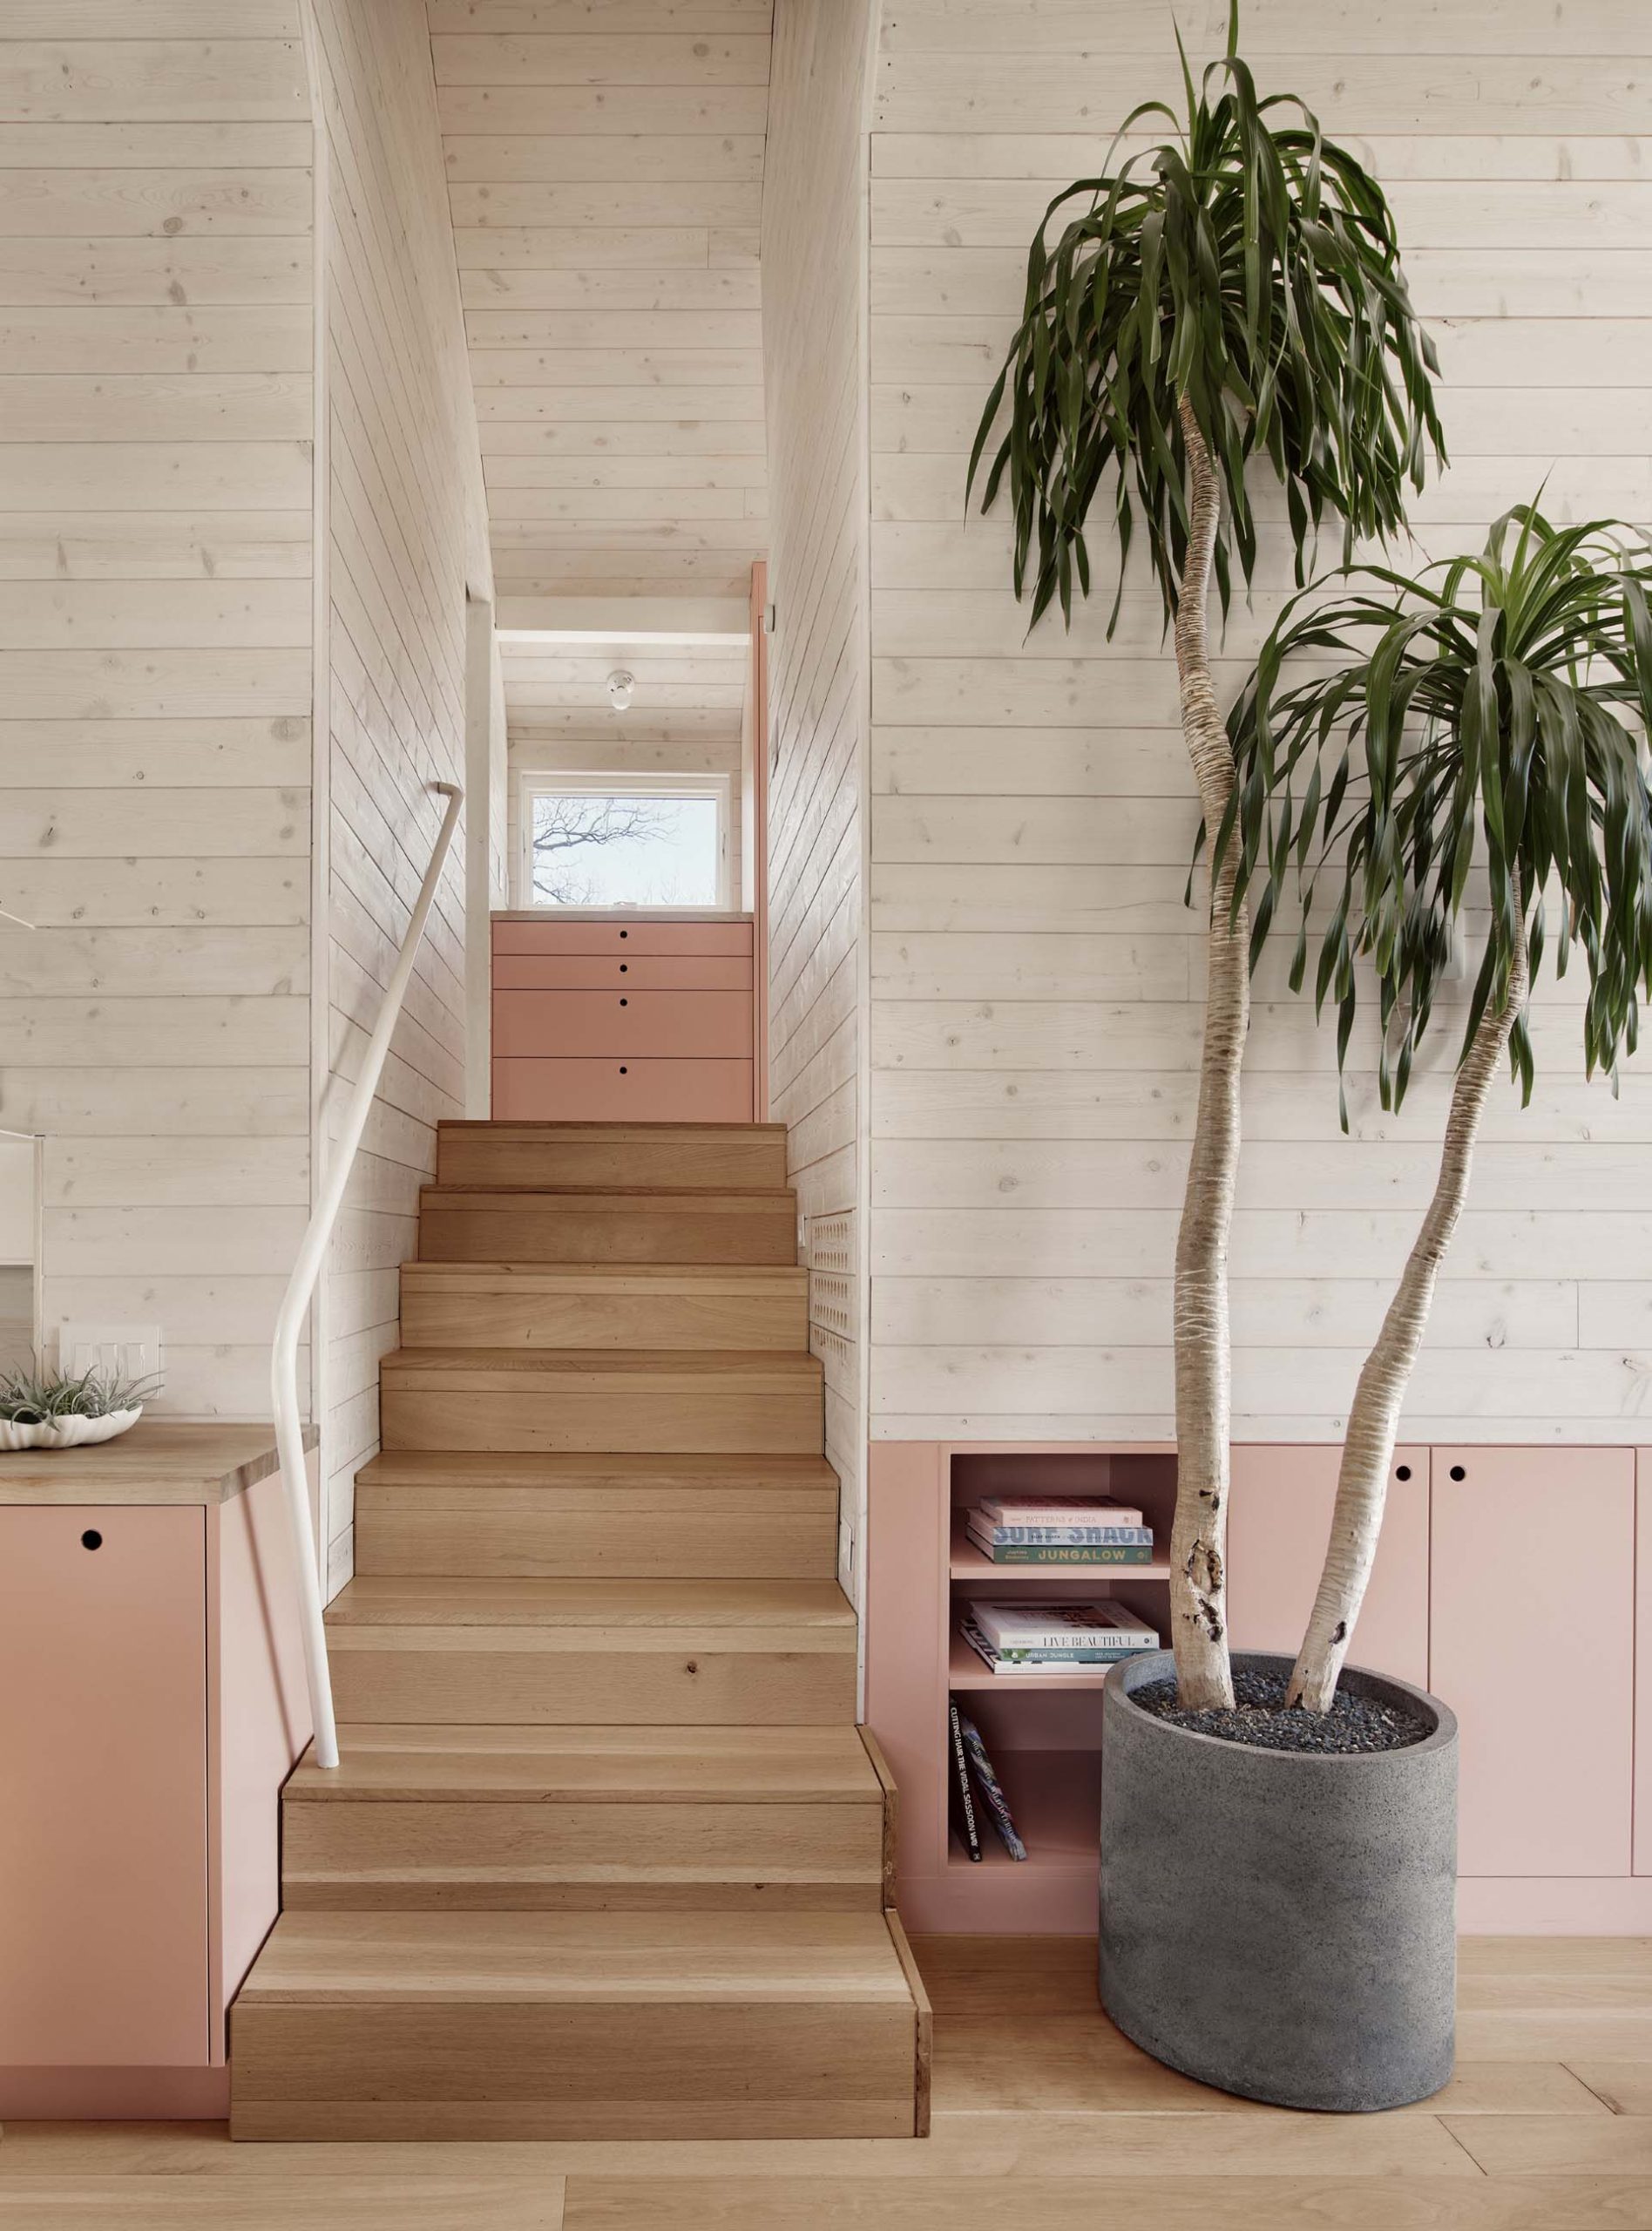 A modern interior with wood floors includes pastel pink cabinetry.